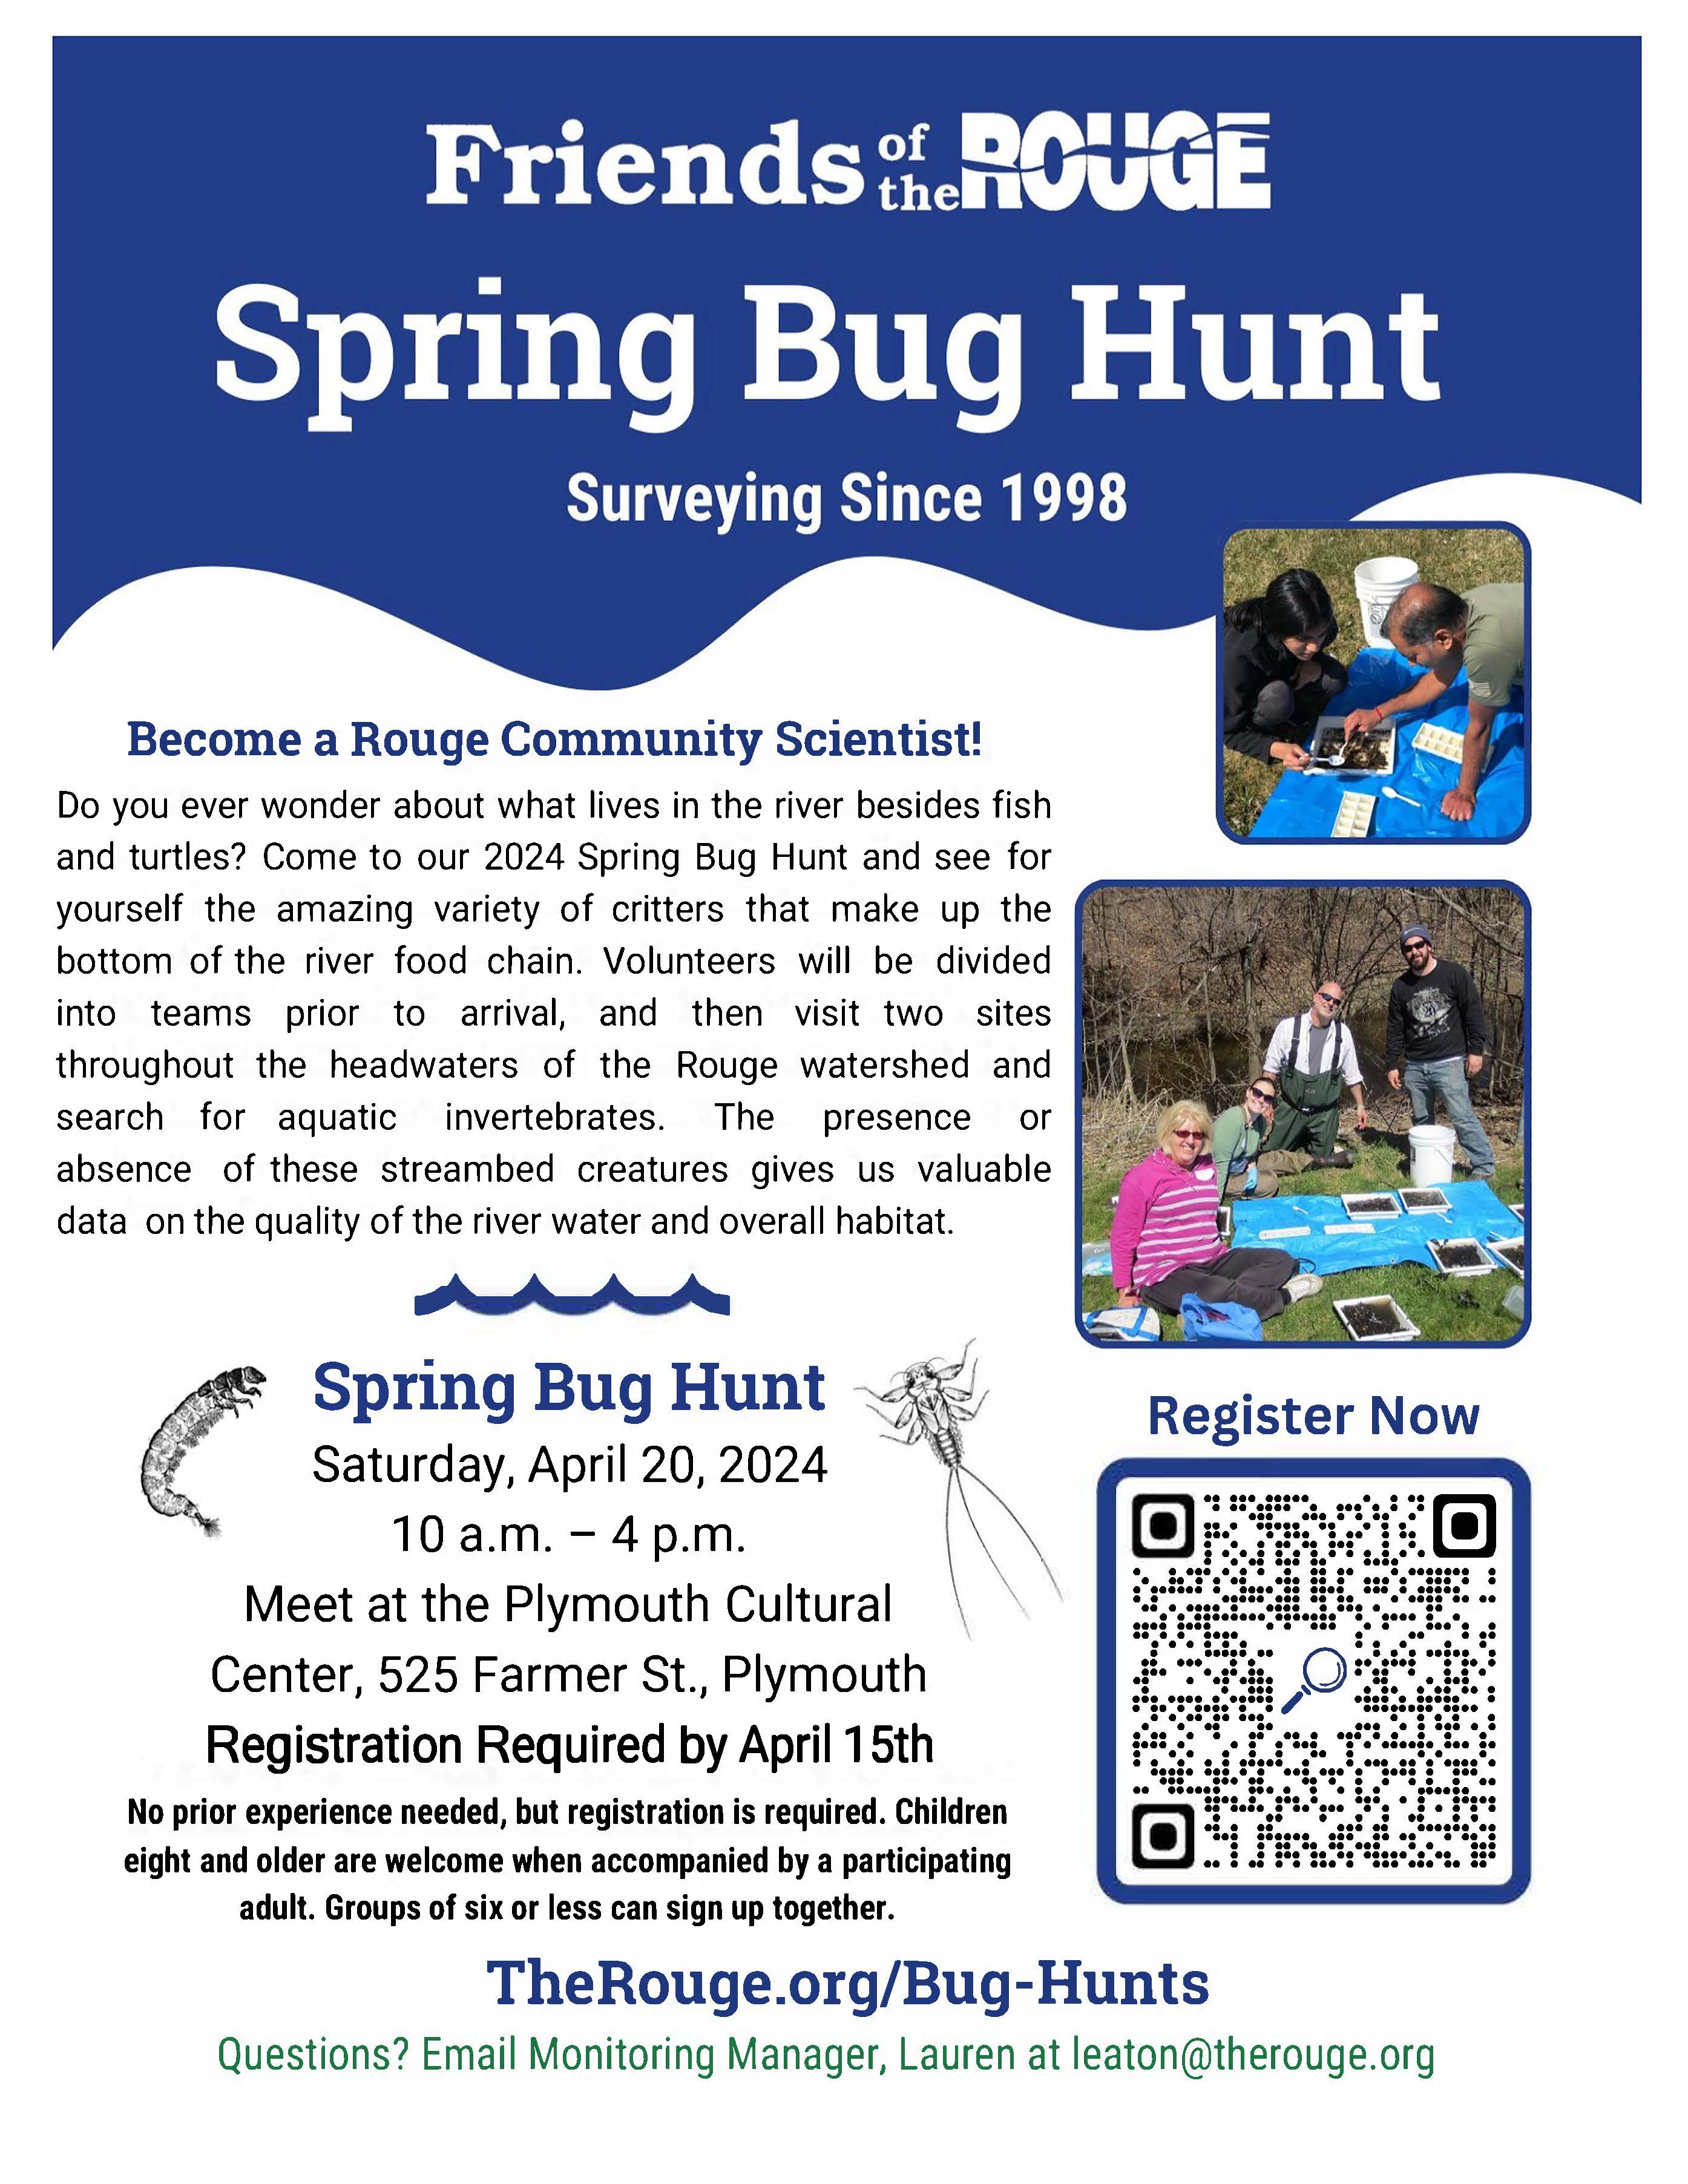 Flyer from Friends of the Rouge announcing the 2024 Spring Bug Hunt April 20, 2024 10am - 4pm meeting at Plymouth Cultural Center. Registration by April 15th.